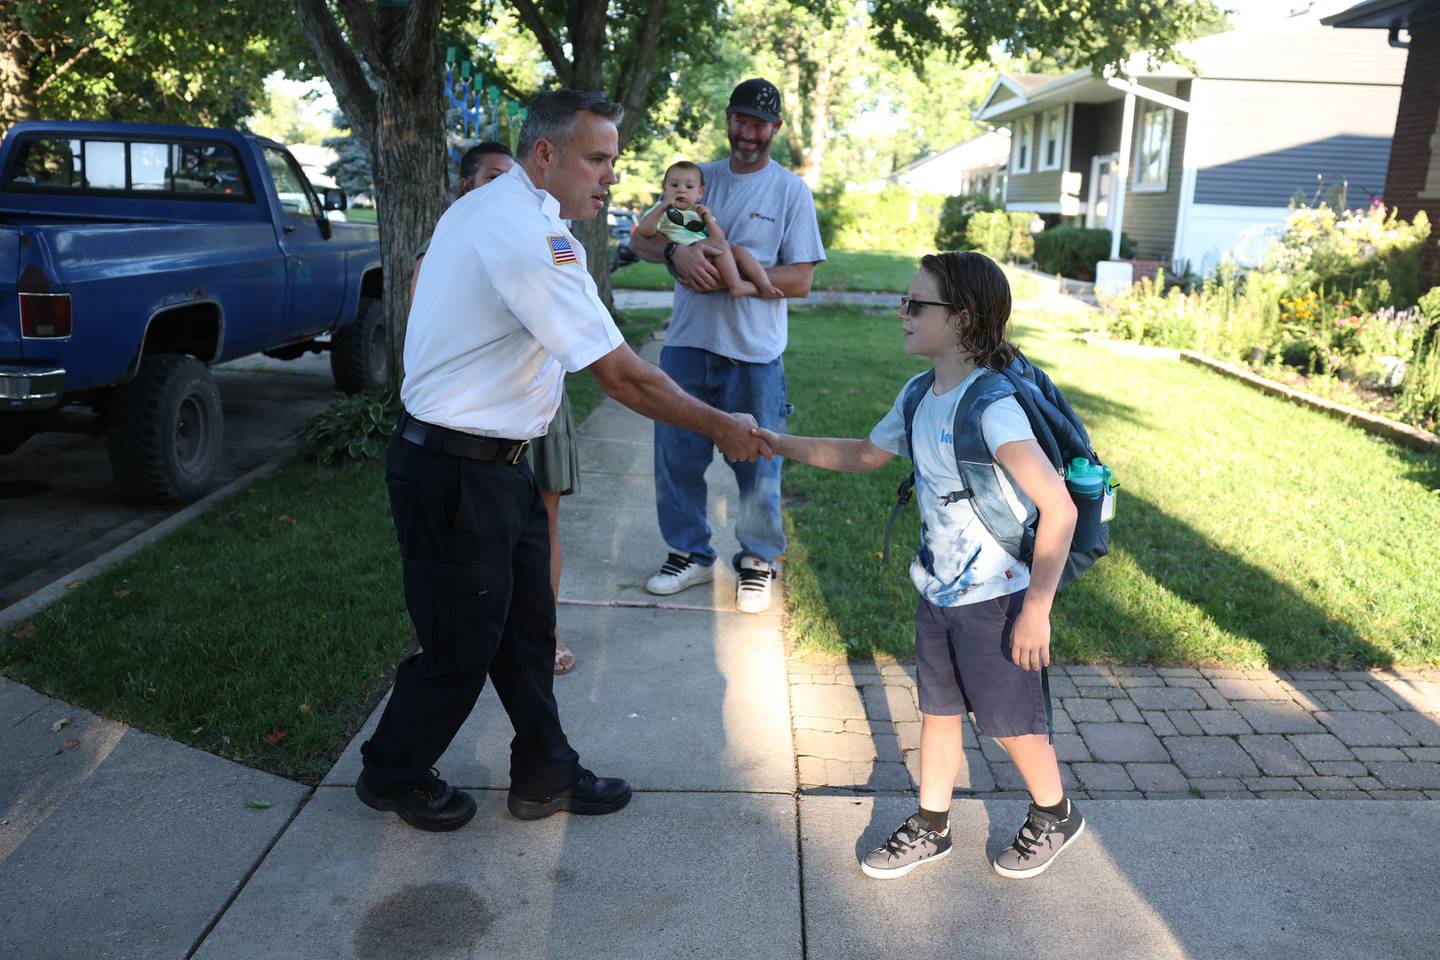 Fire battalion chief John Koch greets William Zaffino. William won a raffle to get a ride in a fire truck to his first day of school at Eisenhower Academy in Joliet. Wednesday, Aug. 17, 2022, in Joliet.